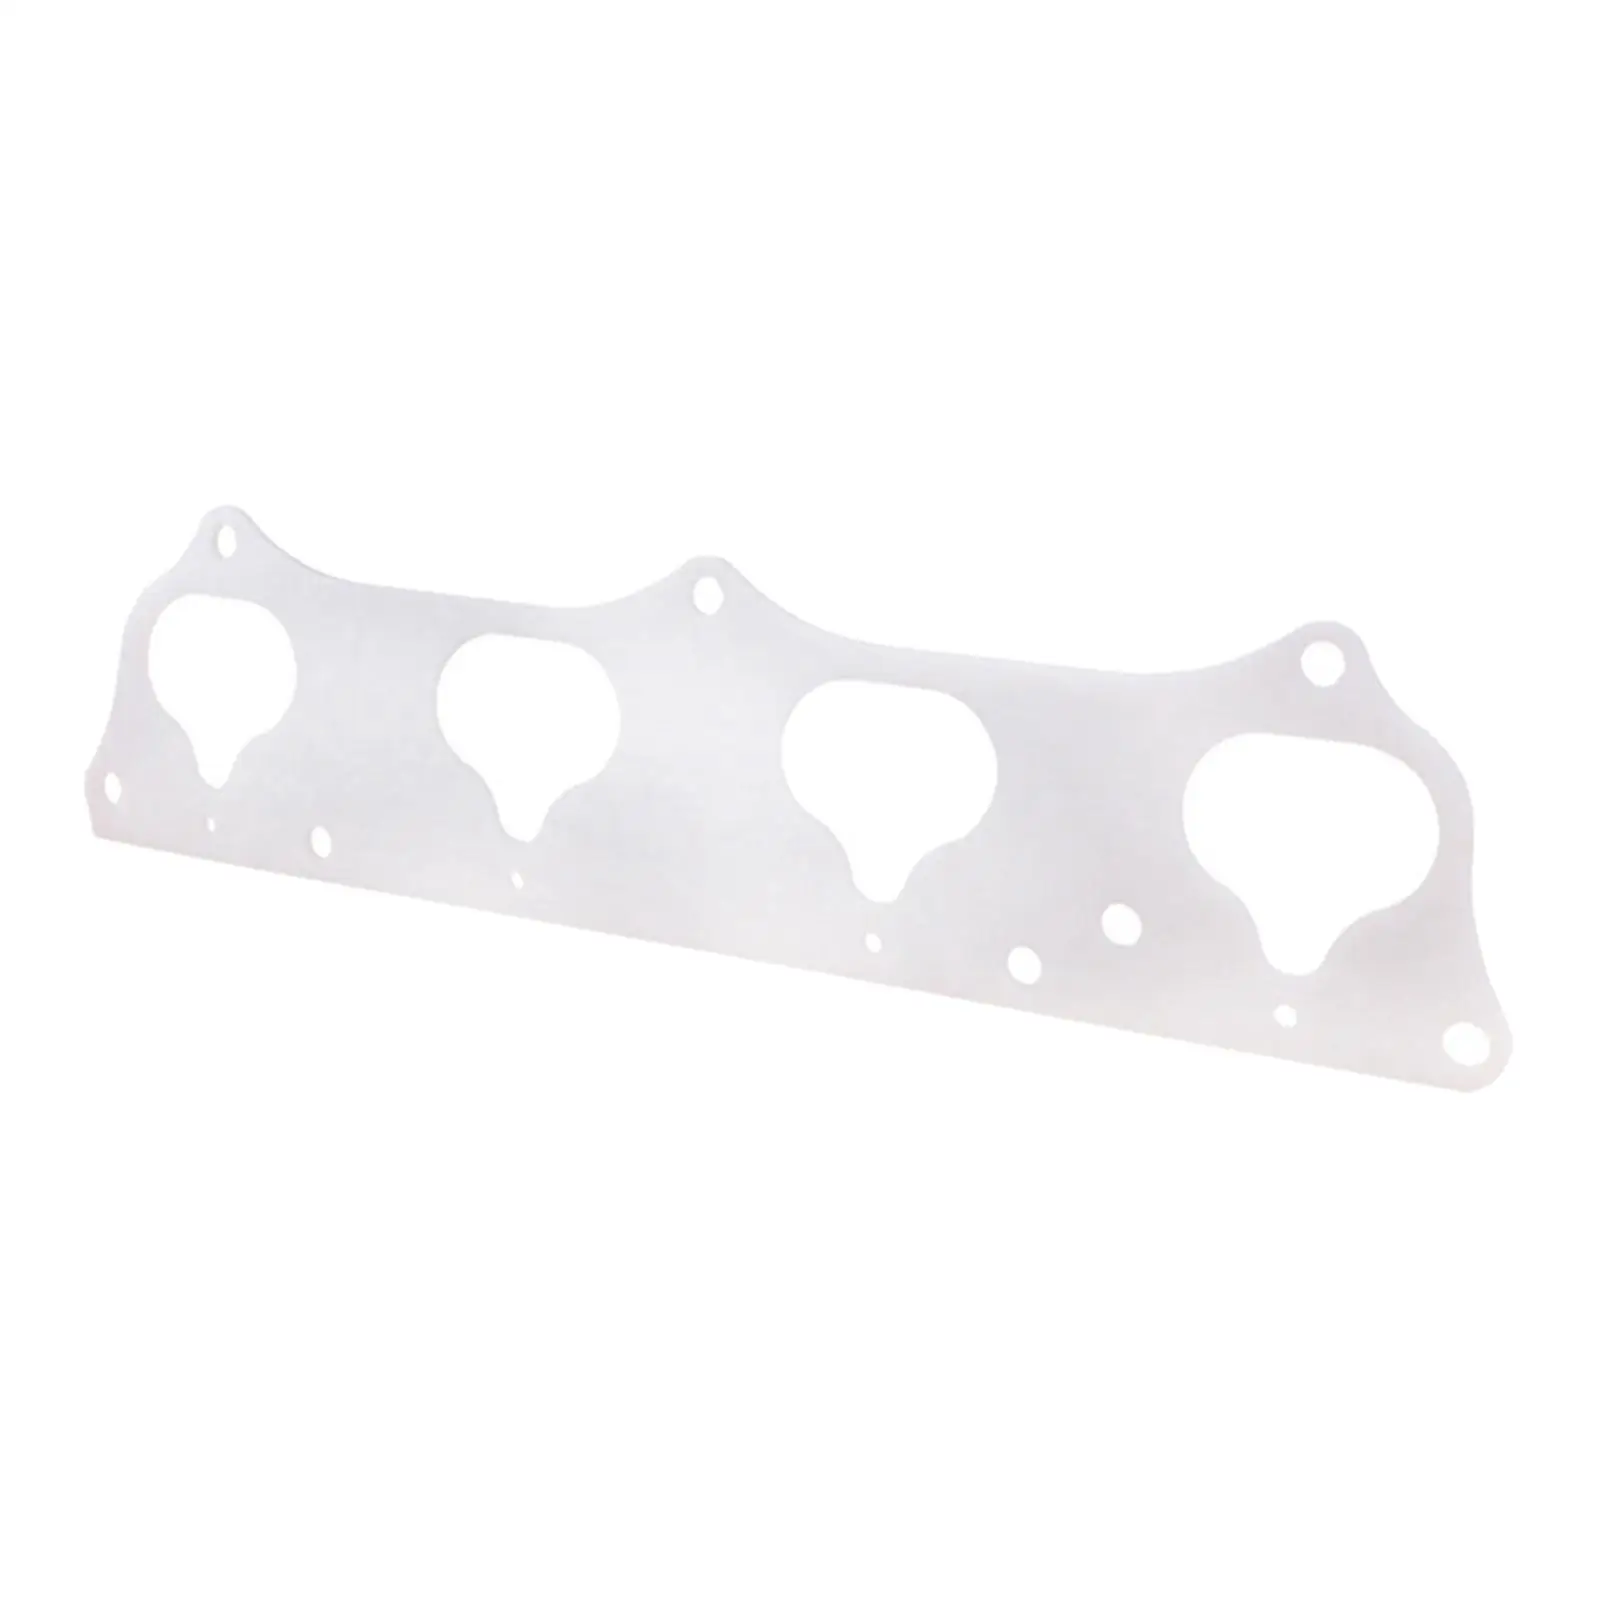 Car Thermal Intake Manifold Gasket Accessories for Swap K20A/A2/A3/Z1